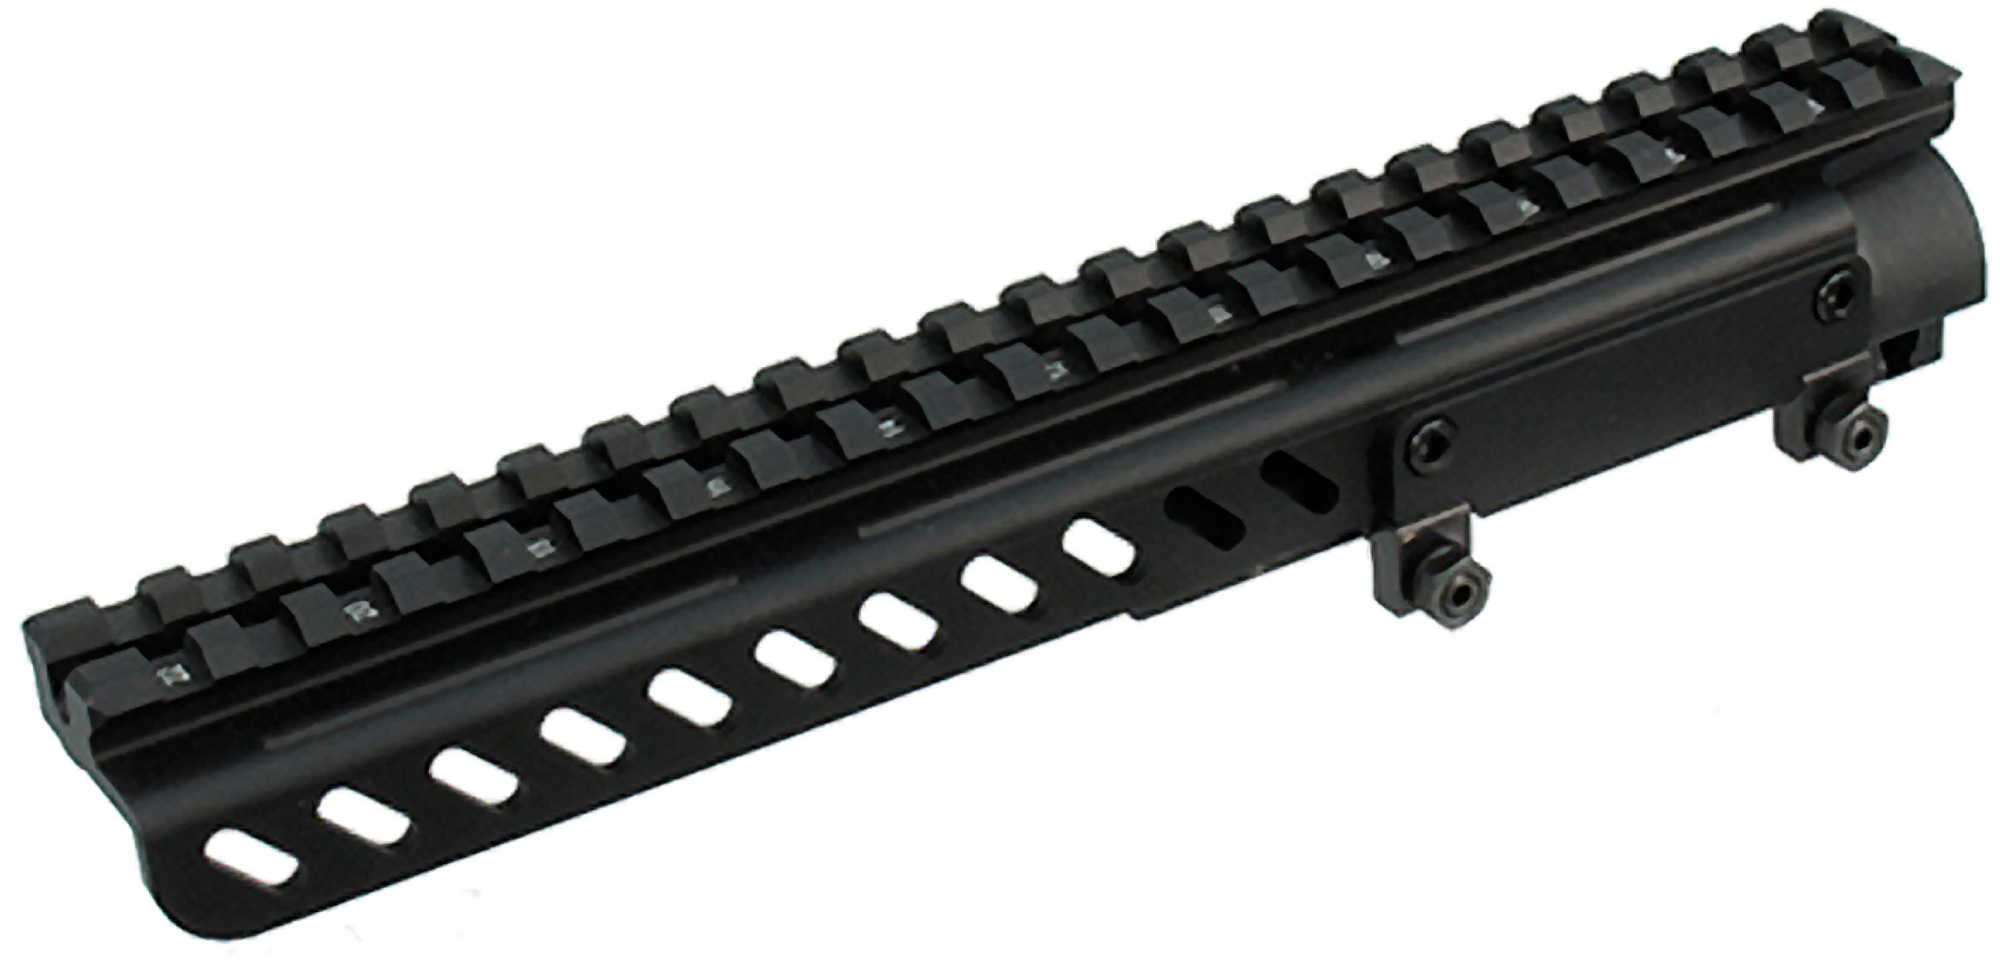 Leapers Inc. - UTG Receiver Cover Mount Fits SKS with 22 Slots and Shell Deflector Black MTU017